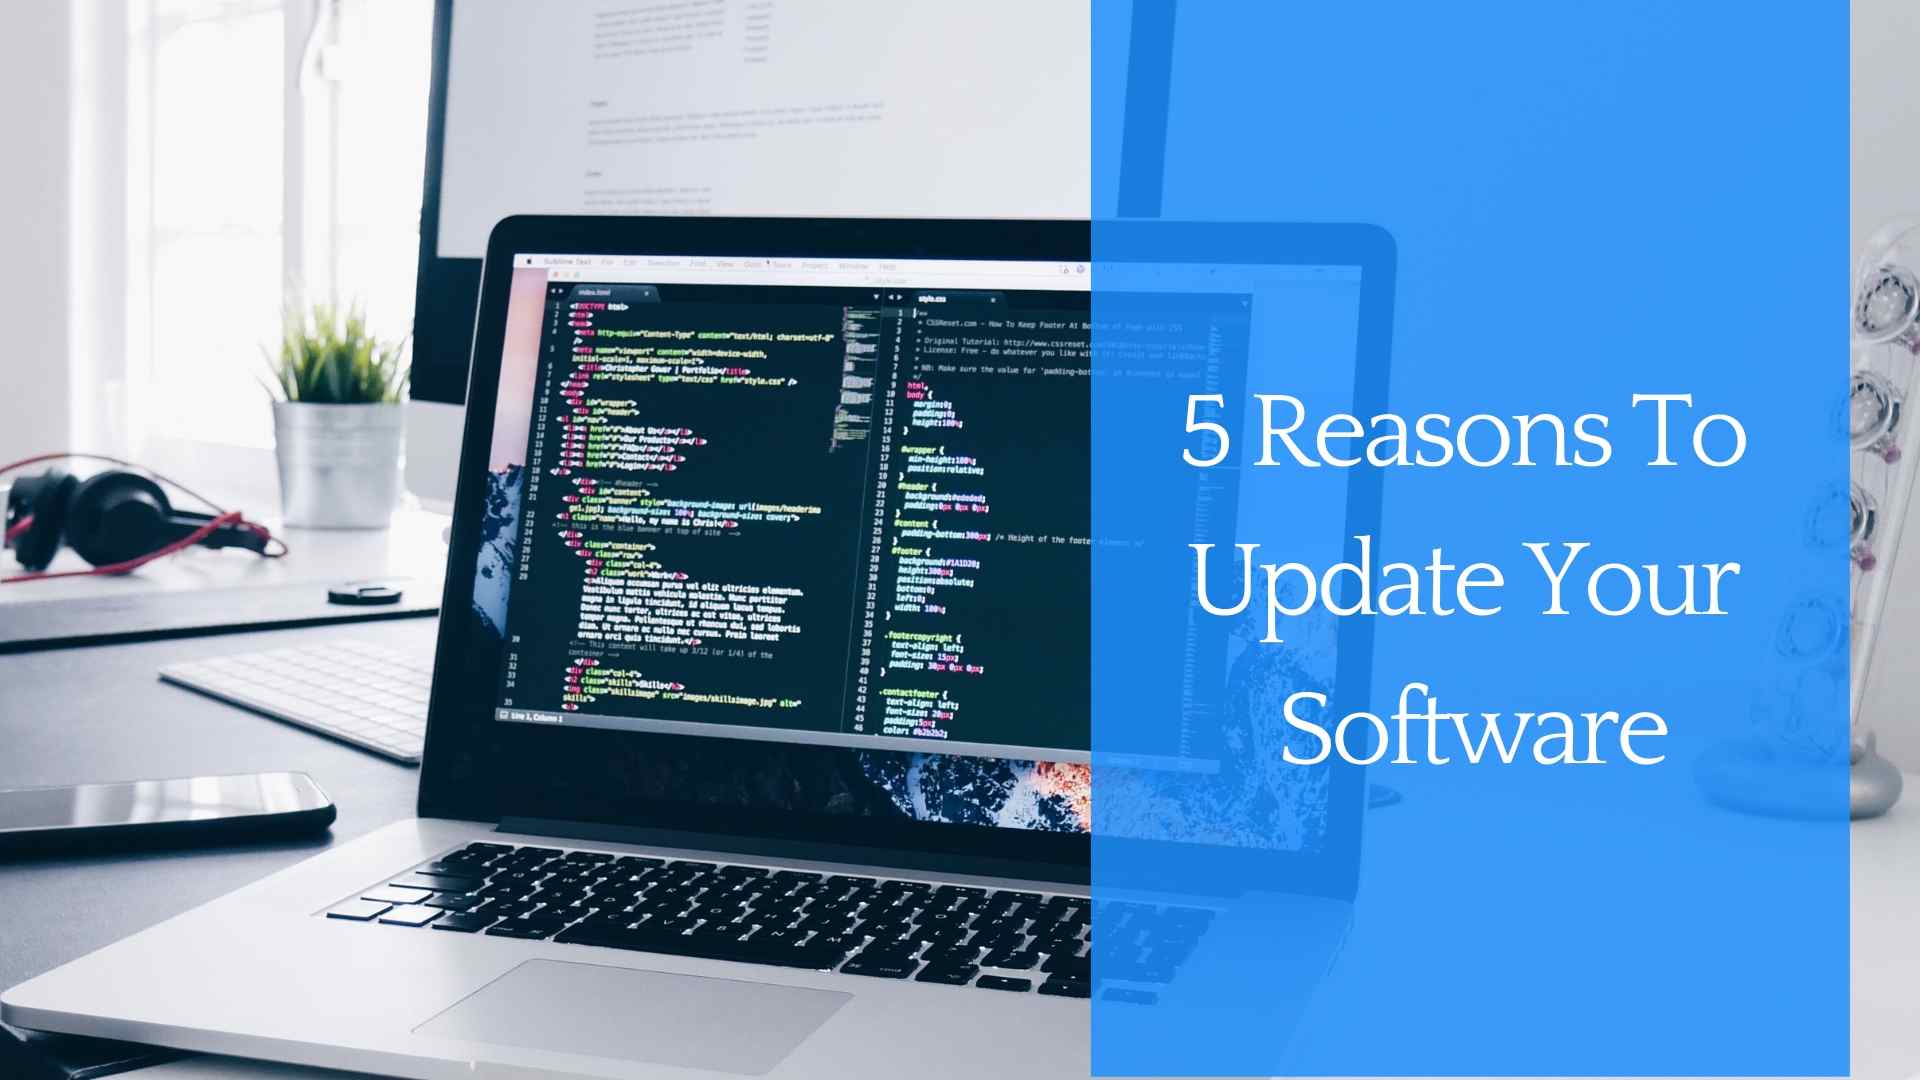 5 Reasons To Update Your Software